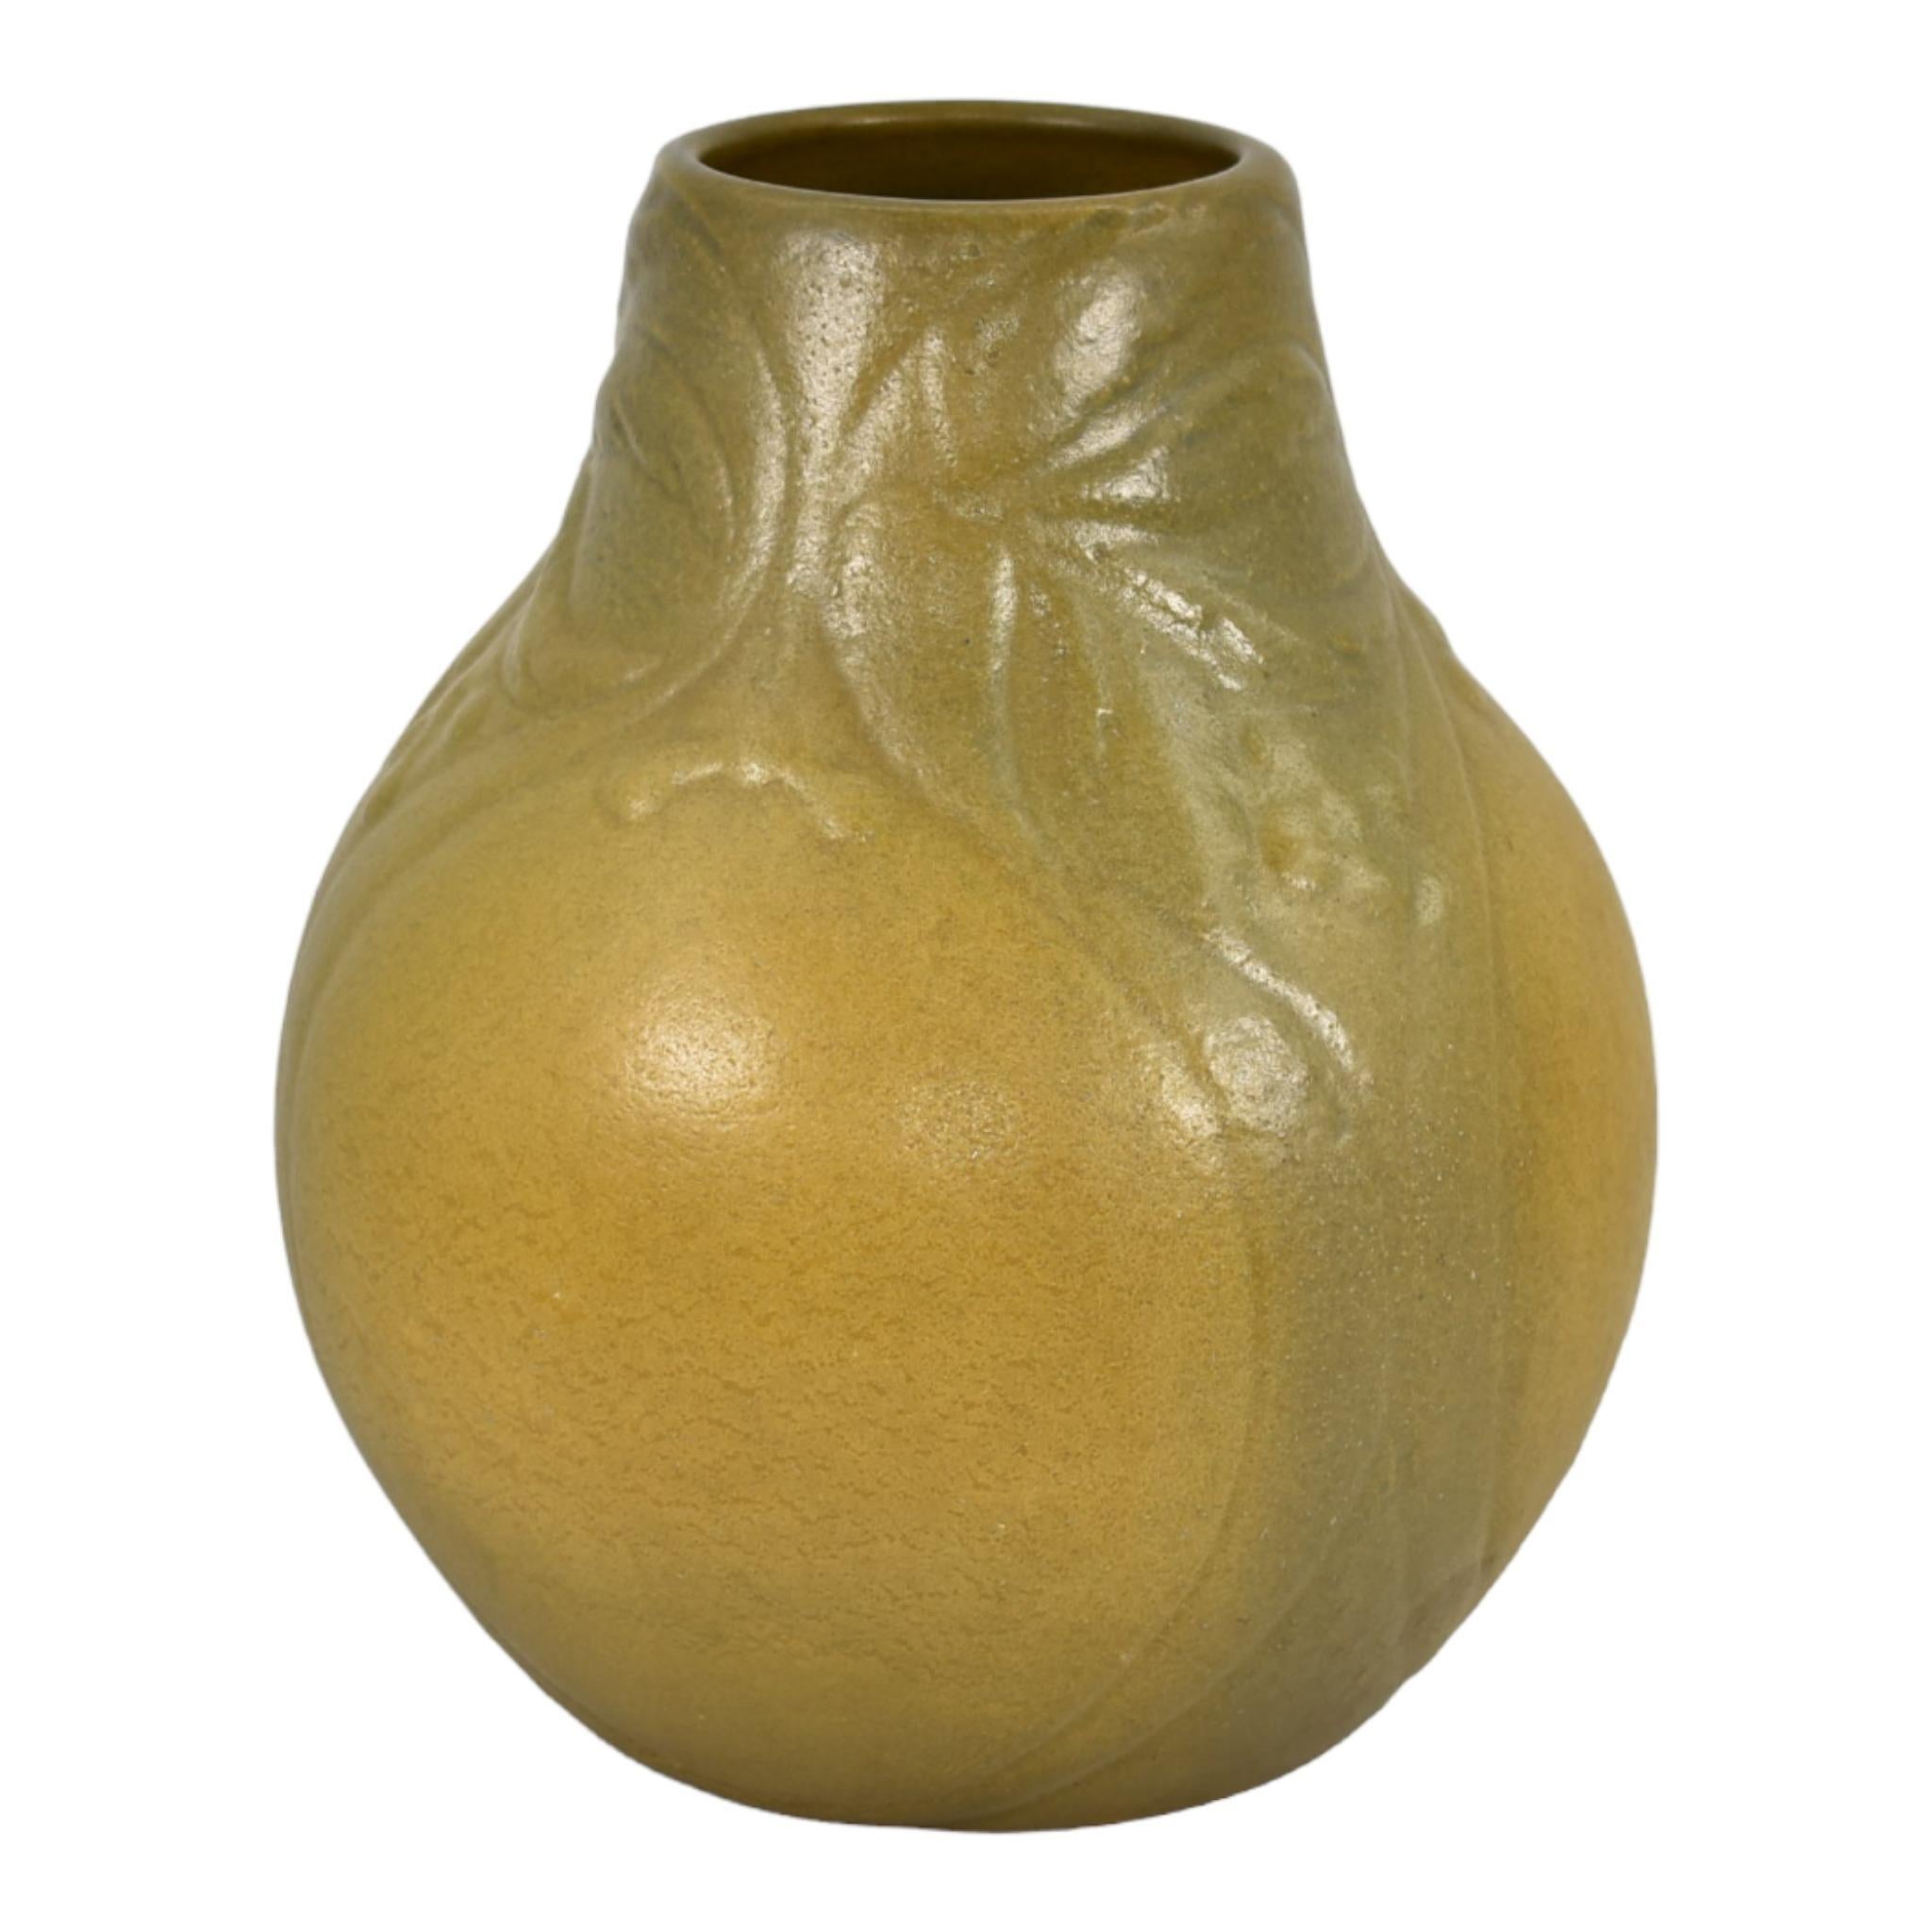 Van Briggle 1904 Vintage Arts And Crafts Pottery Olive Green Ceramic Vase 164
Stunning arts and crafts vase covered in an wonderful organic dark and light olive green over a stylized plant design.
Excellent original condition. No chips, cracks,